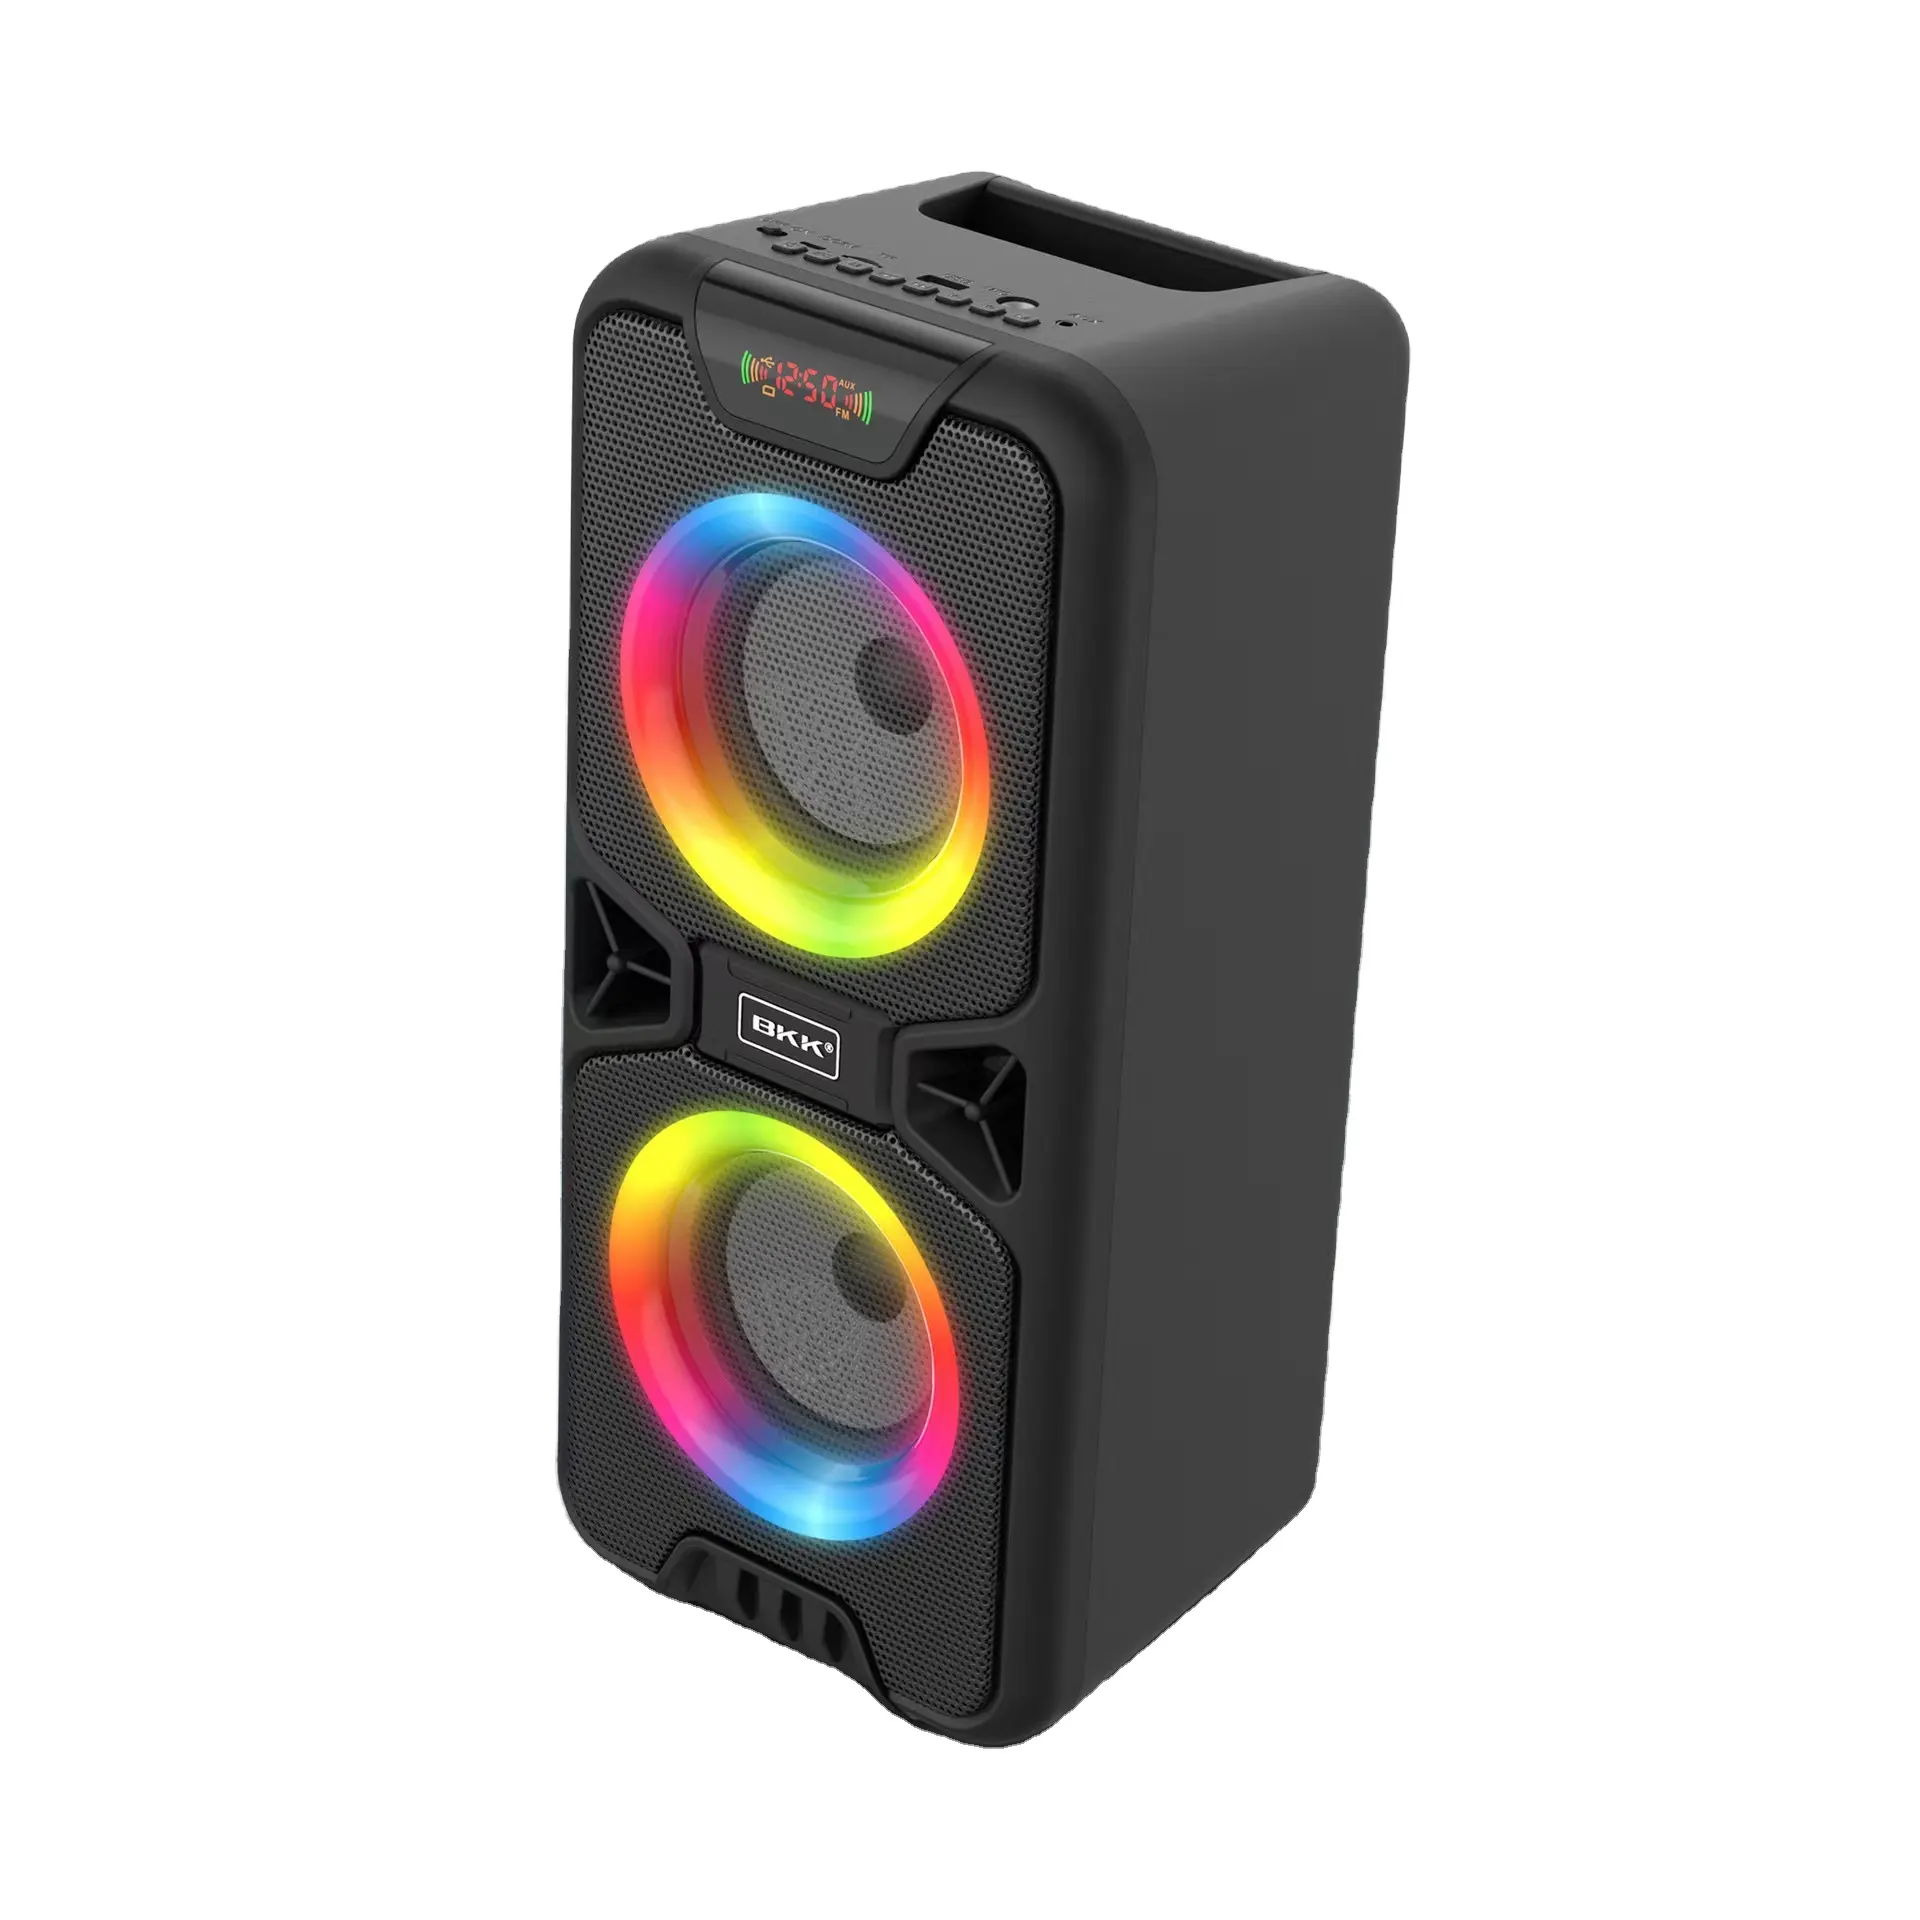 Portable Led Light Blue Tooth Speaker J-jbl Party Big Bass Subwoofer Box Wireless Speakers With Microphone